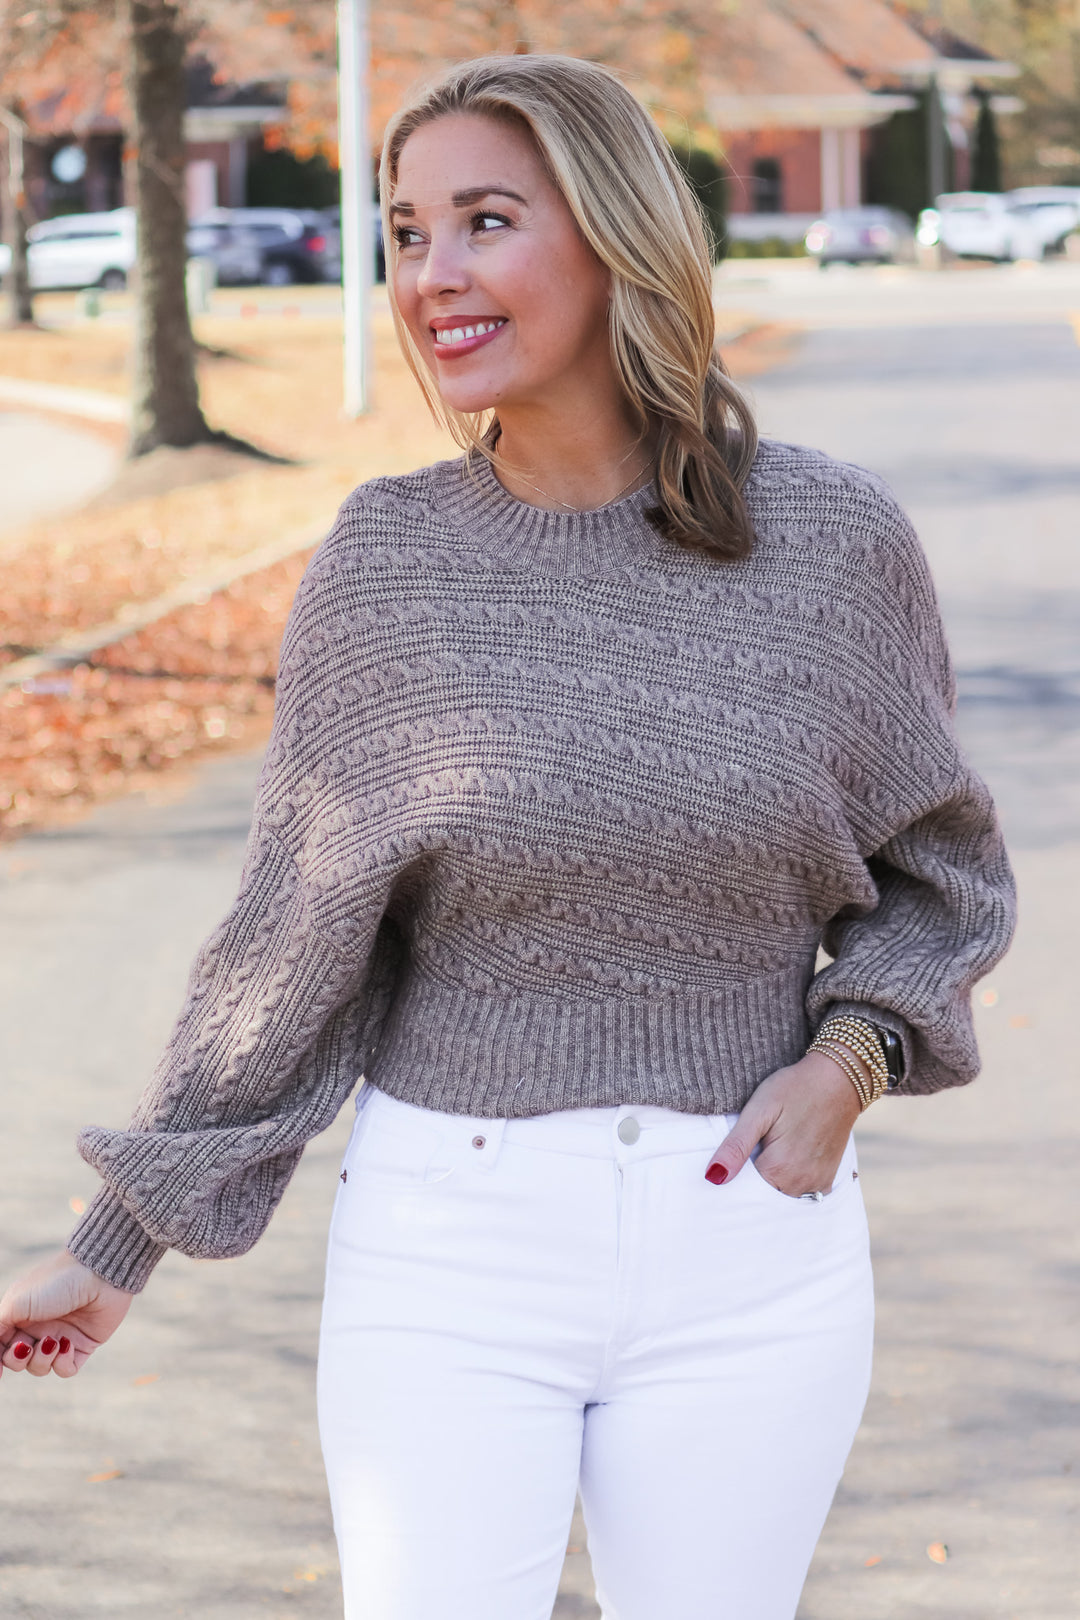 A blonde woman standing outside wearing a taupe colored cable knit sweater and white jeans.